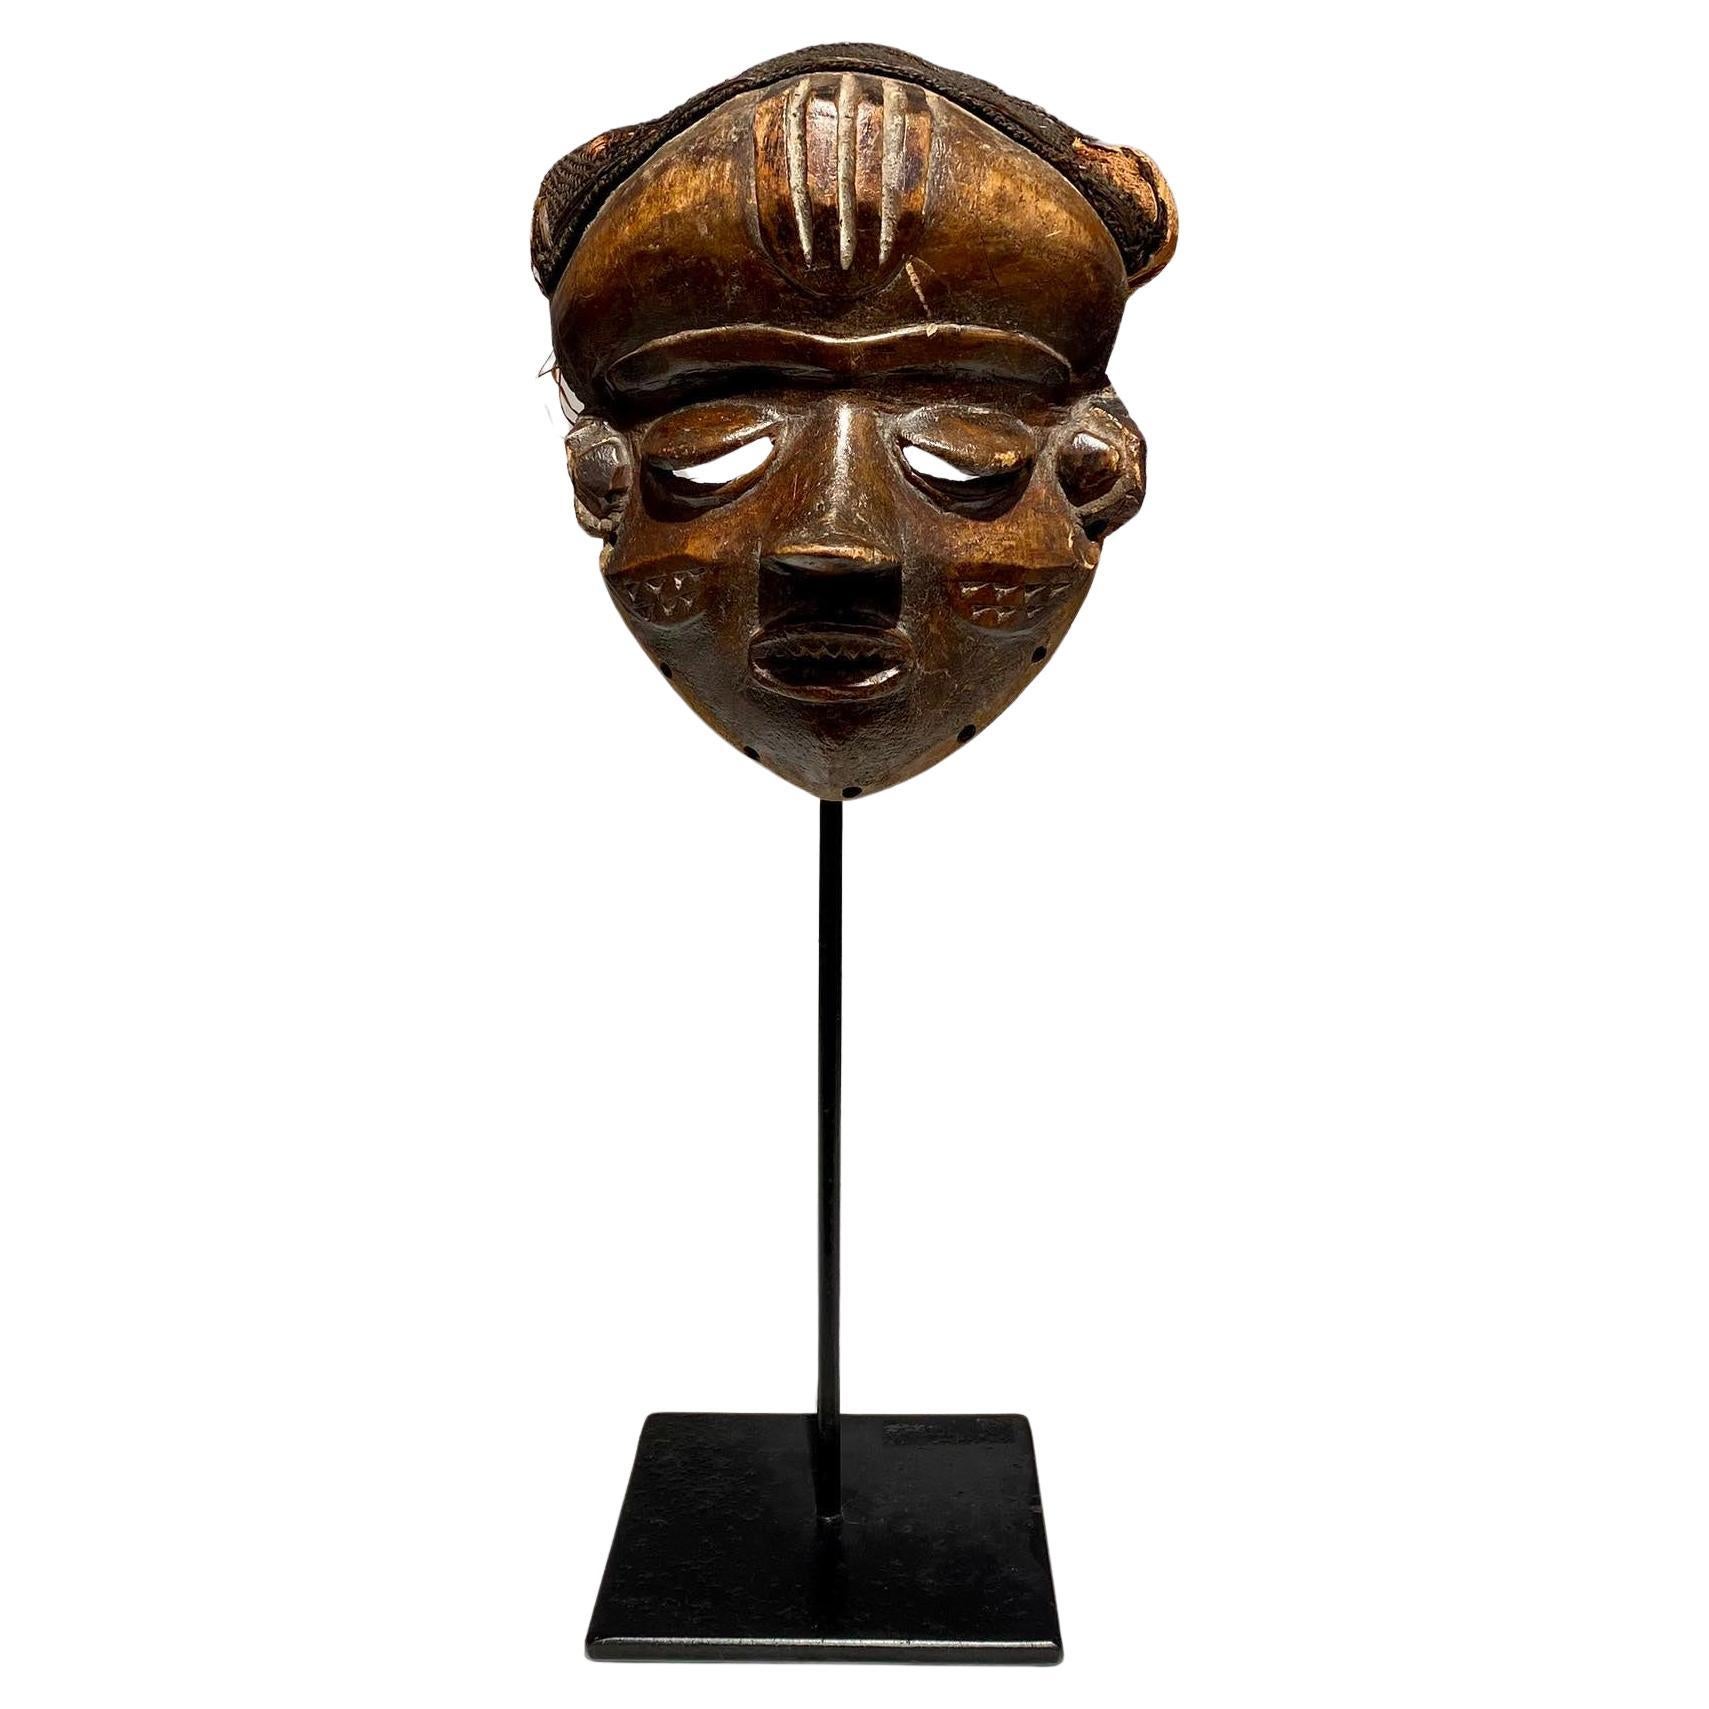 Antique superb Pende mbuya mask DR Congo late 19th century
Mask with filed teeth ! 
Available at art Gallery Decoster Belgium

Tribe : Pende
Country : DR Congo
Age: late 19th / early 20th century
Stylistically, the best known masks come from